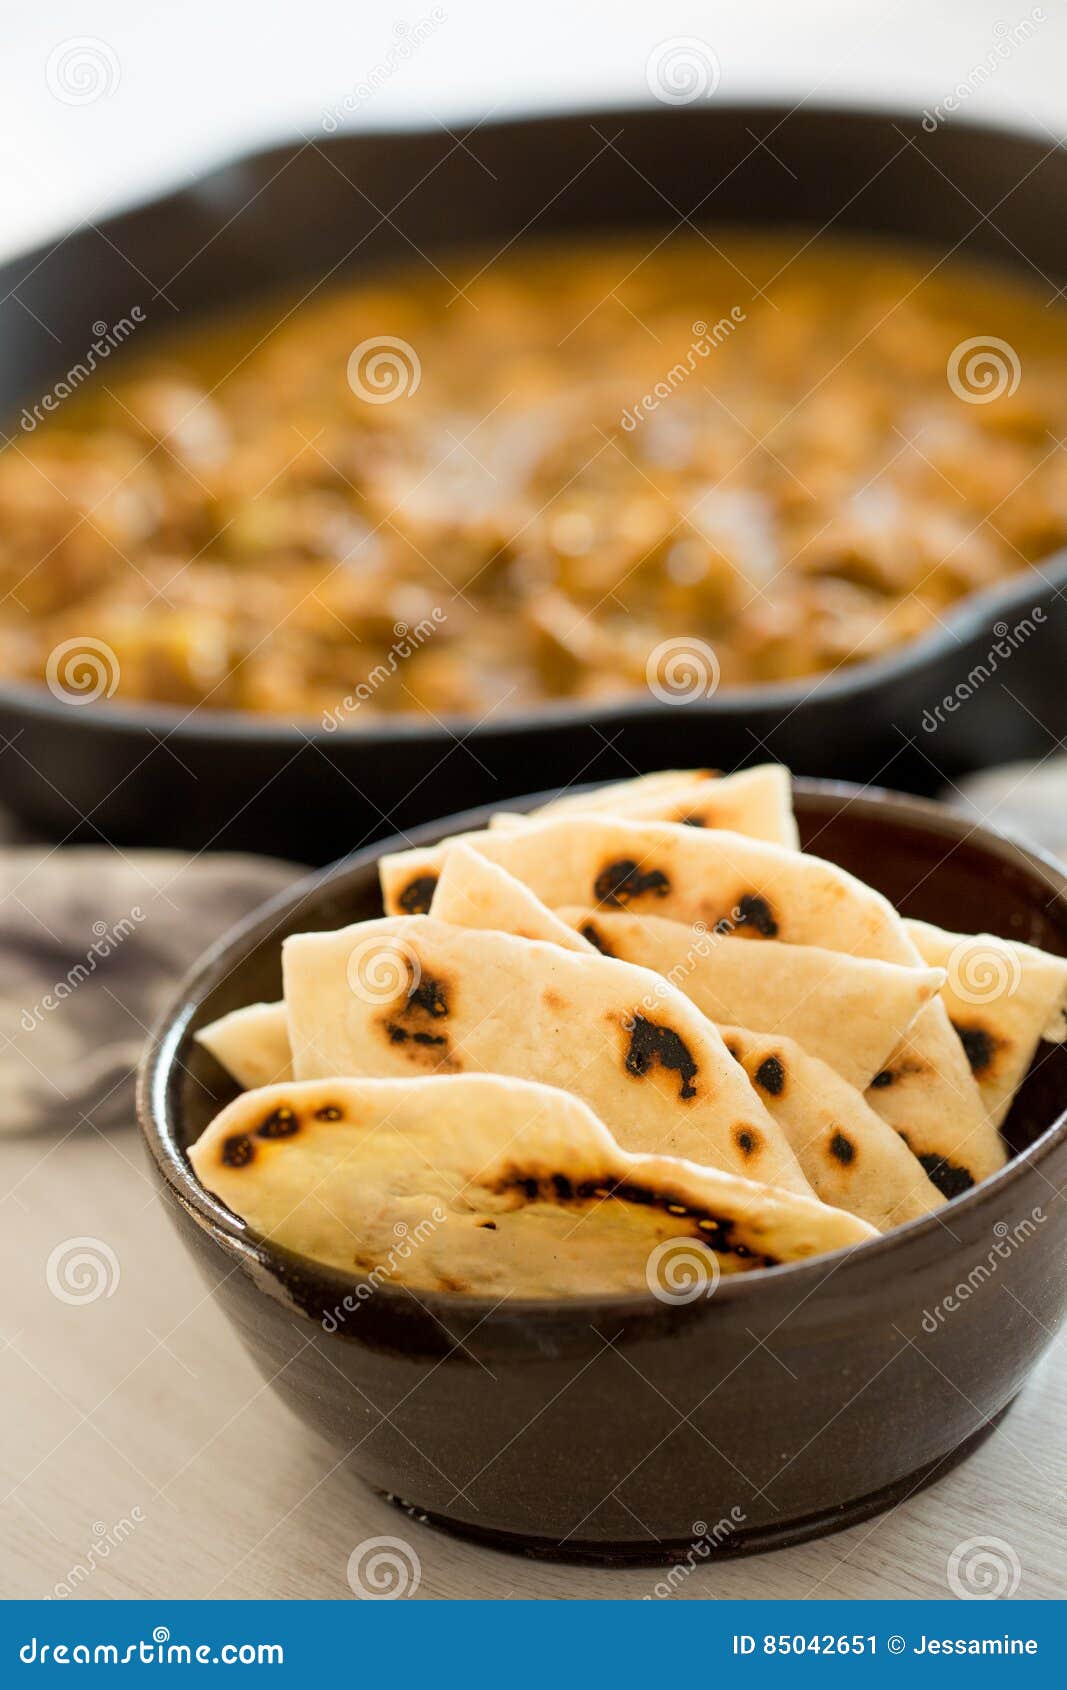 chicken curry and naan